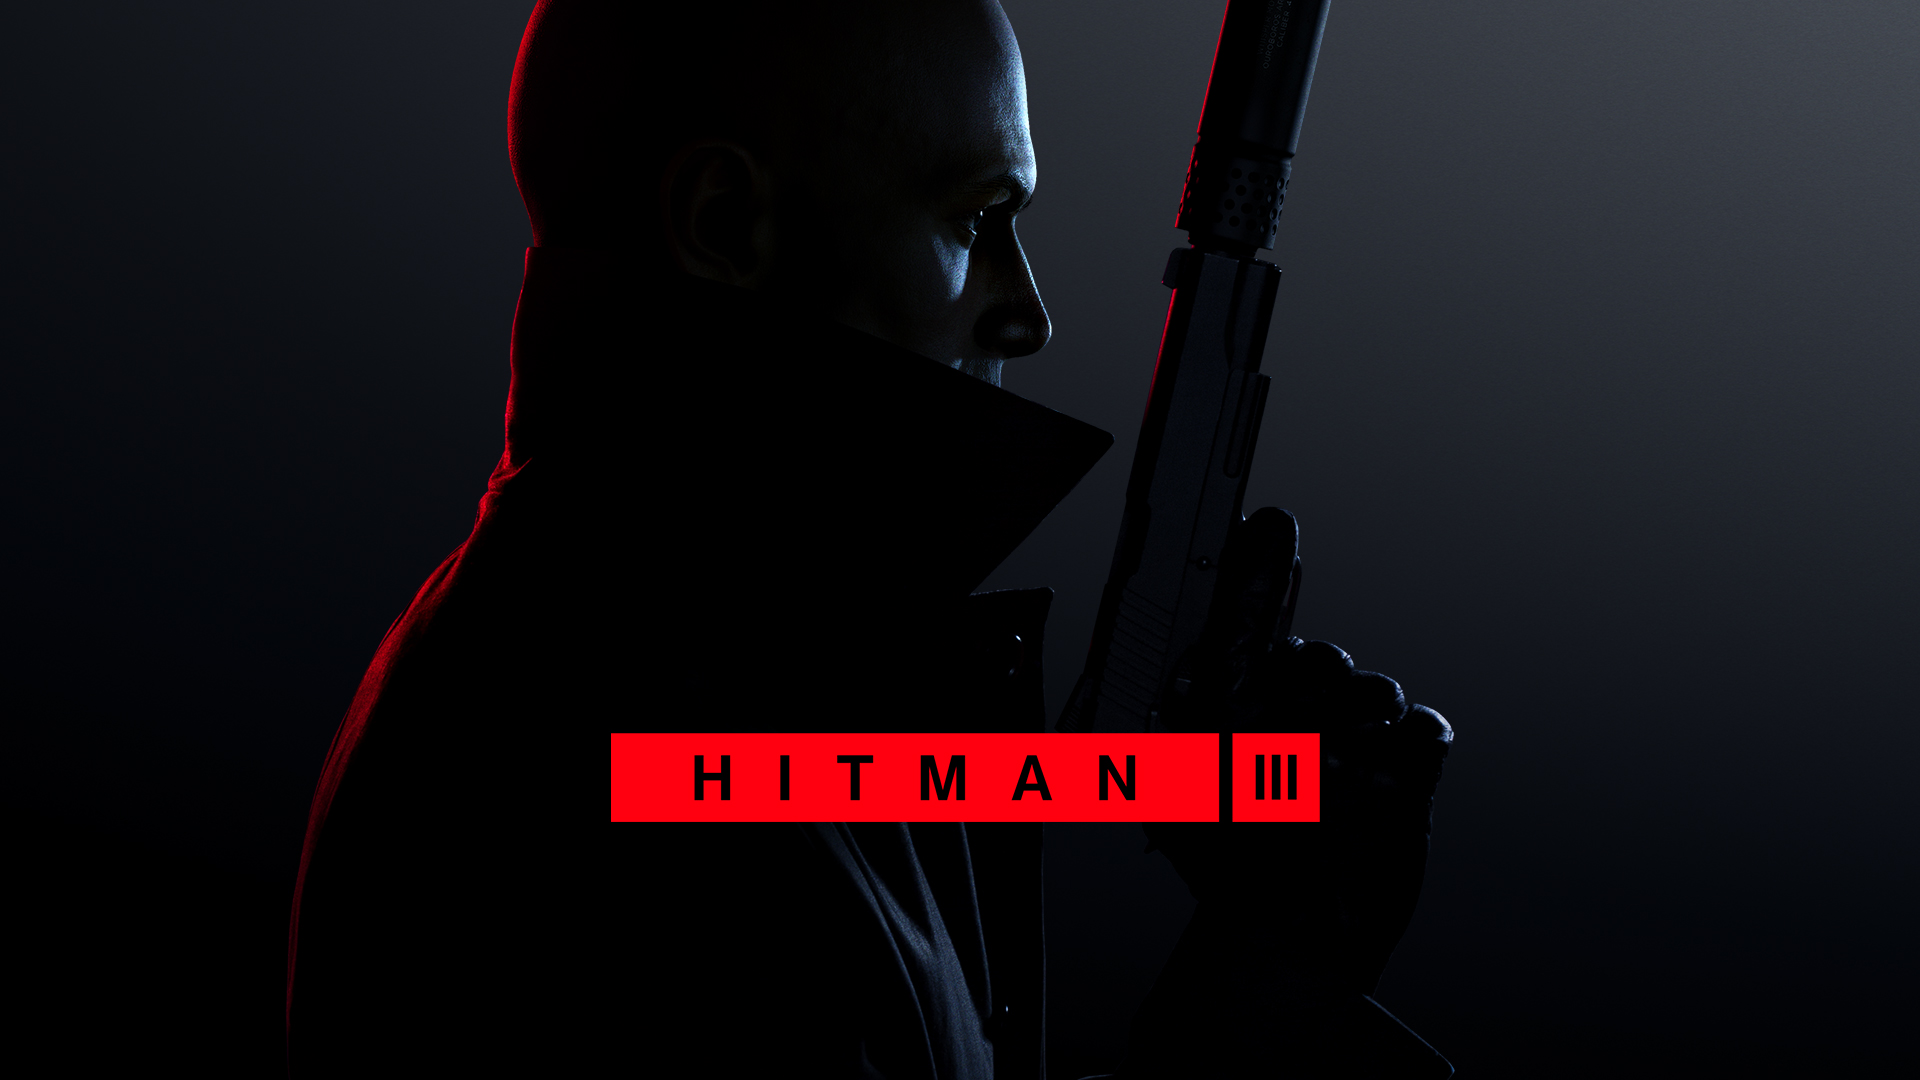 What is the recommended system for Hitman 3?